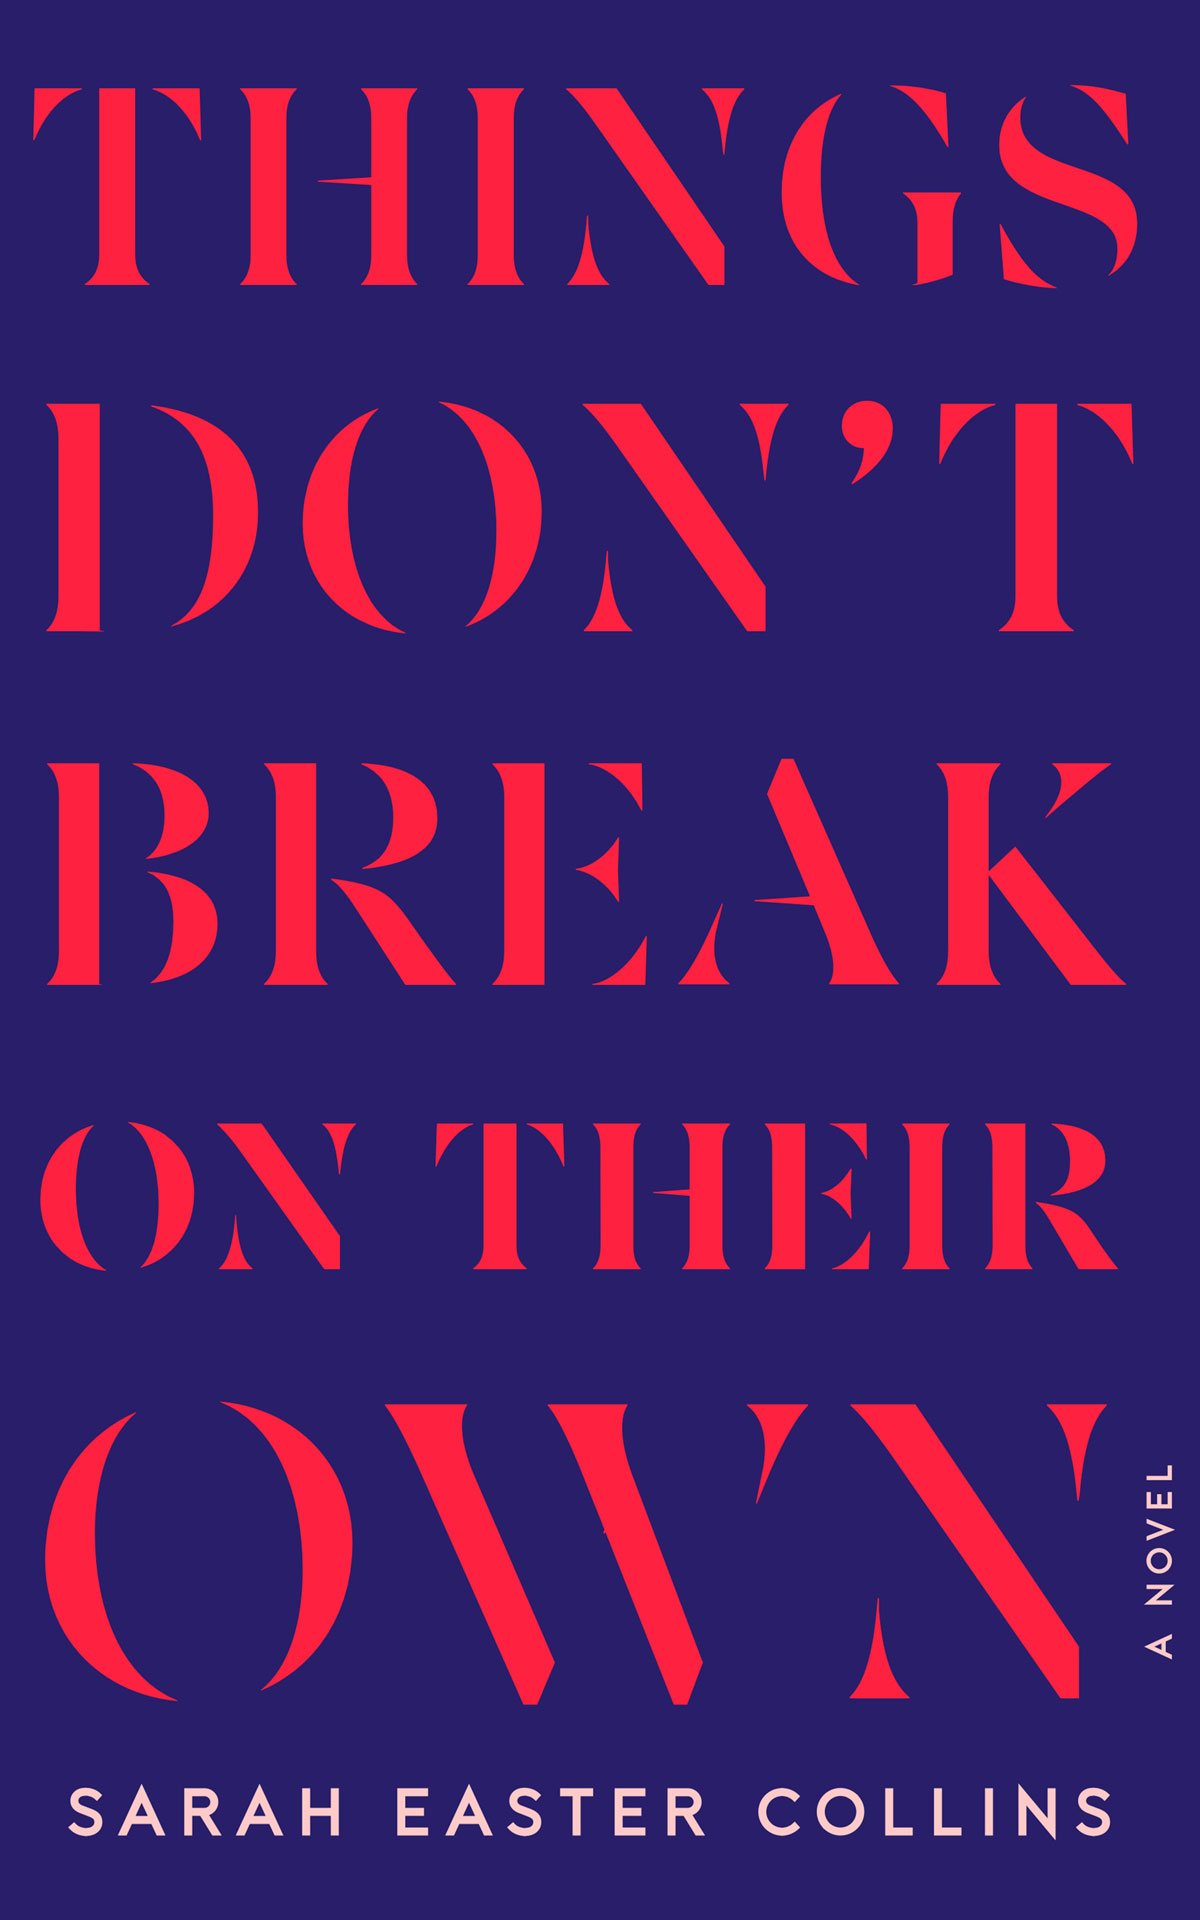 Things Don't Break on their Own by Sarah Easter Collins - US cover